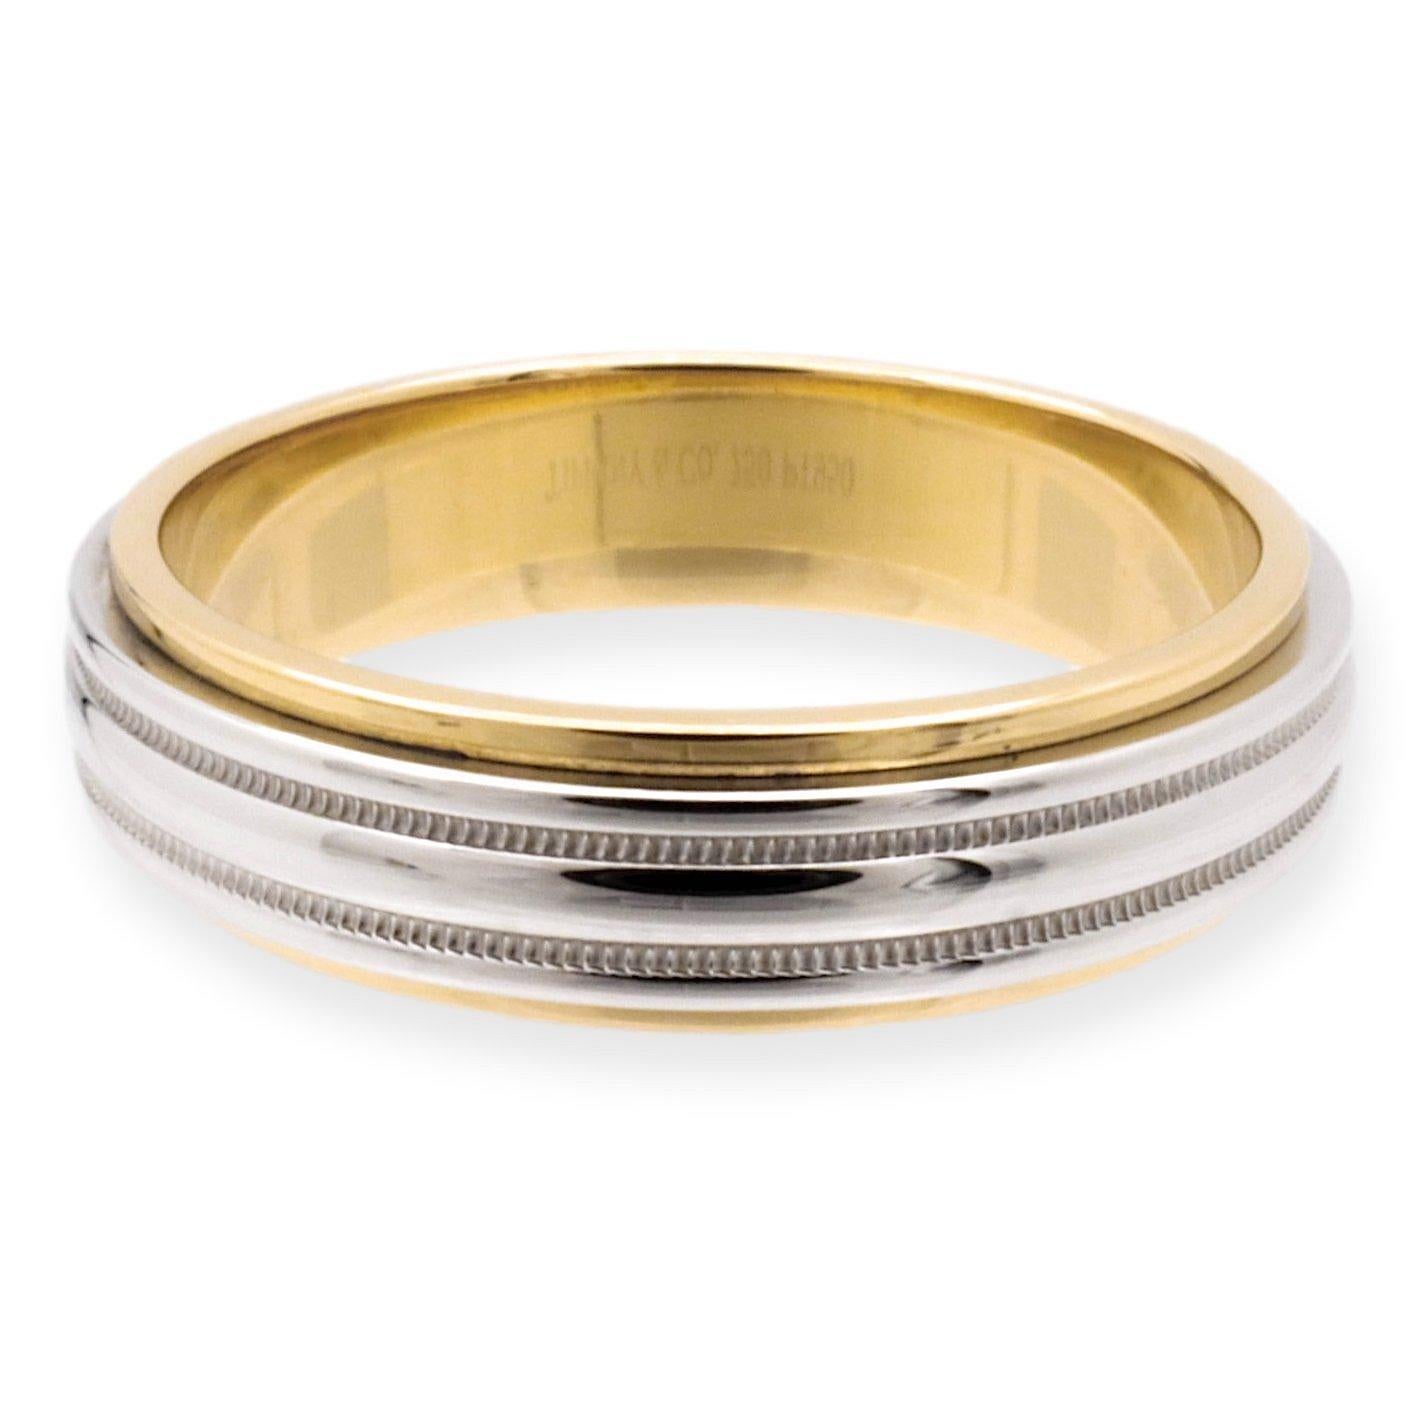 Tiffany & Co. men's wedding band finely crafted in platinum and 18 karat yellow gold from the Together collection with a double mil-grain design. This band is a flat edge band. Fully hallmarked with logo and metal content.

Ring